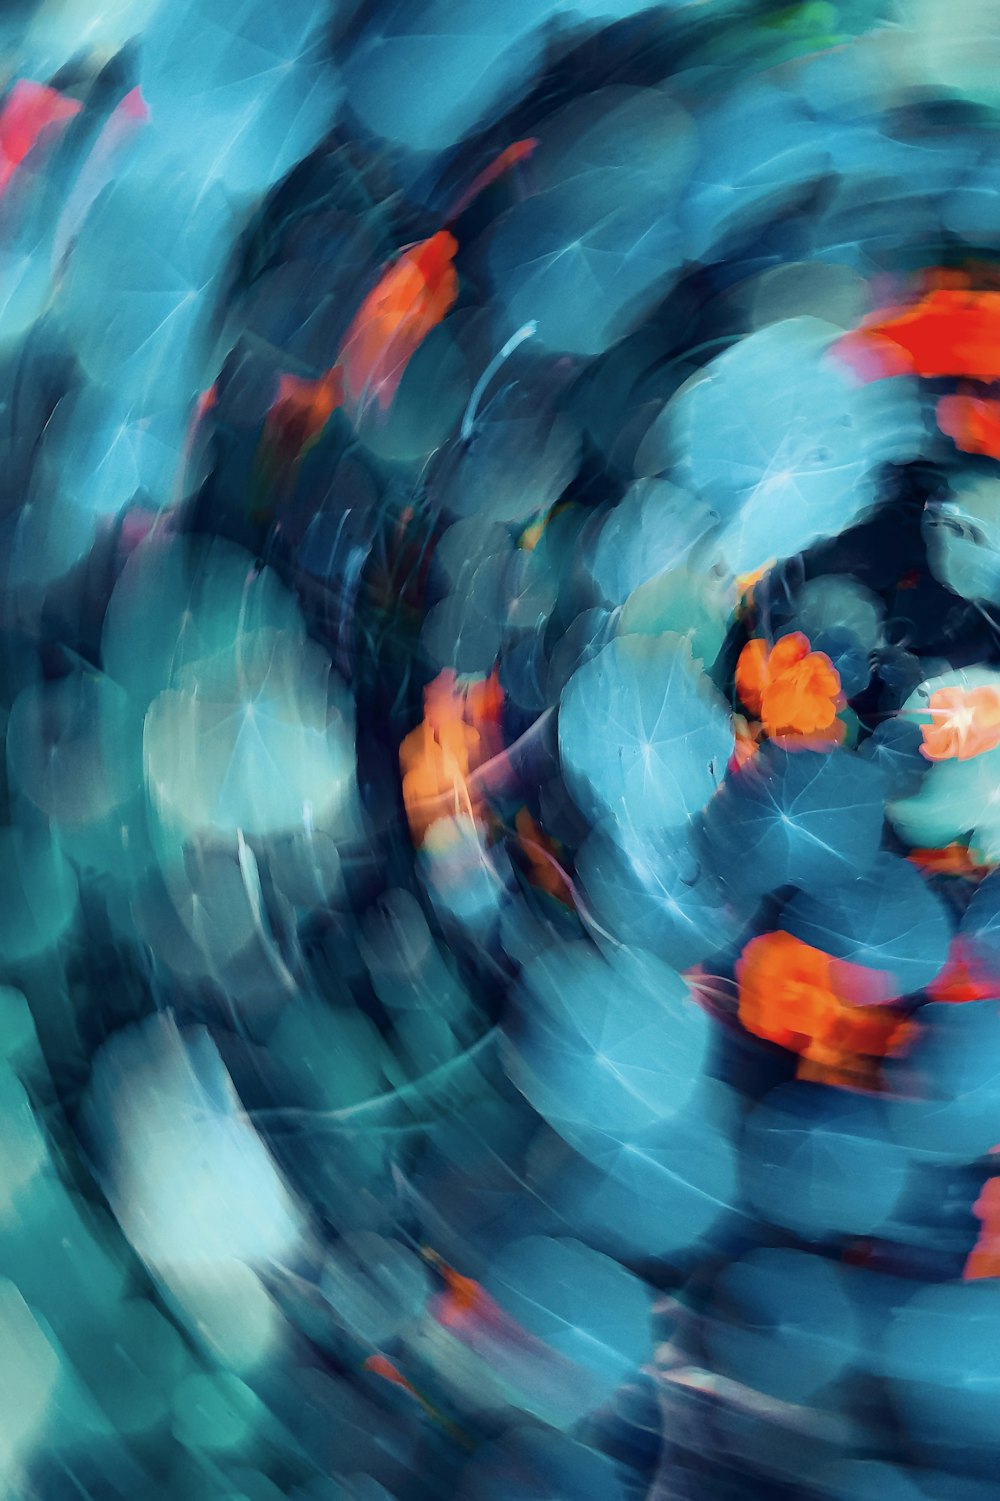 an abstract photo of a blue and orange object